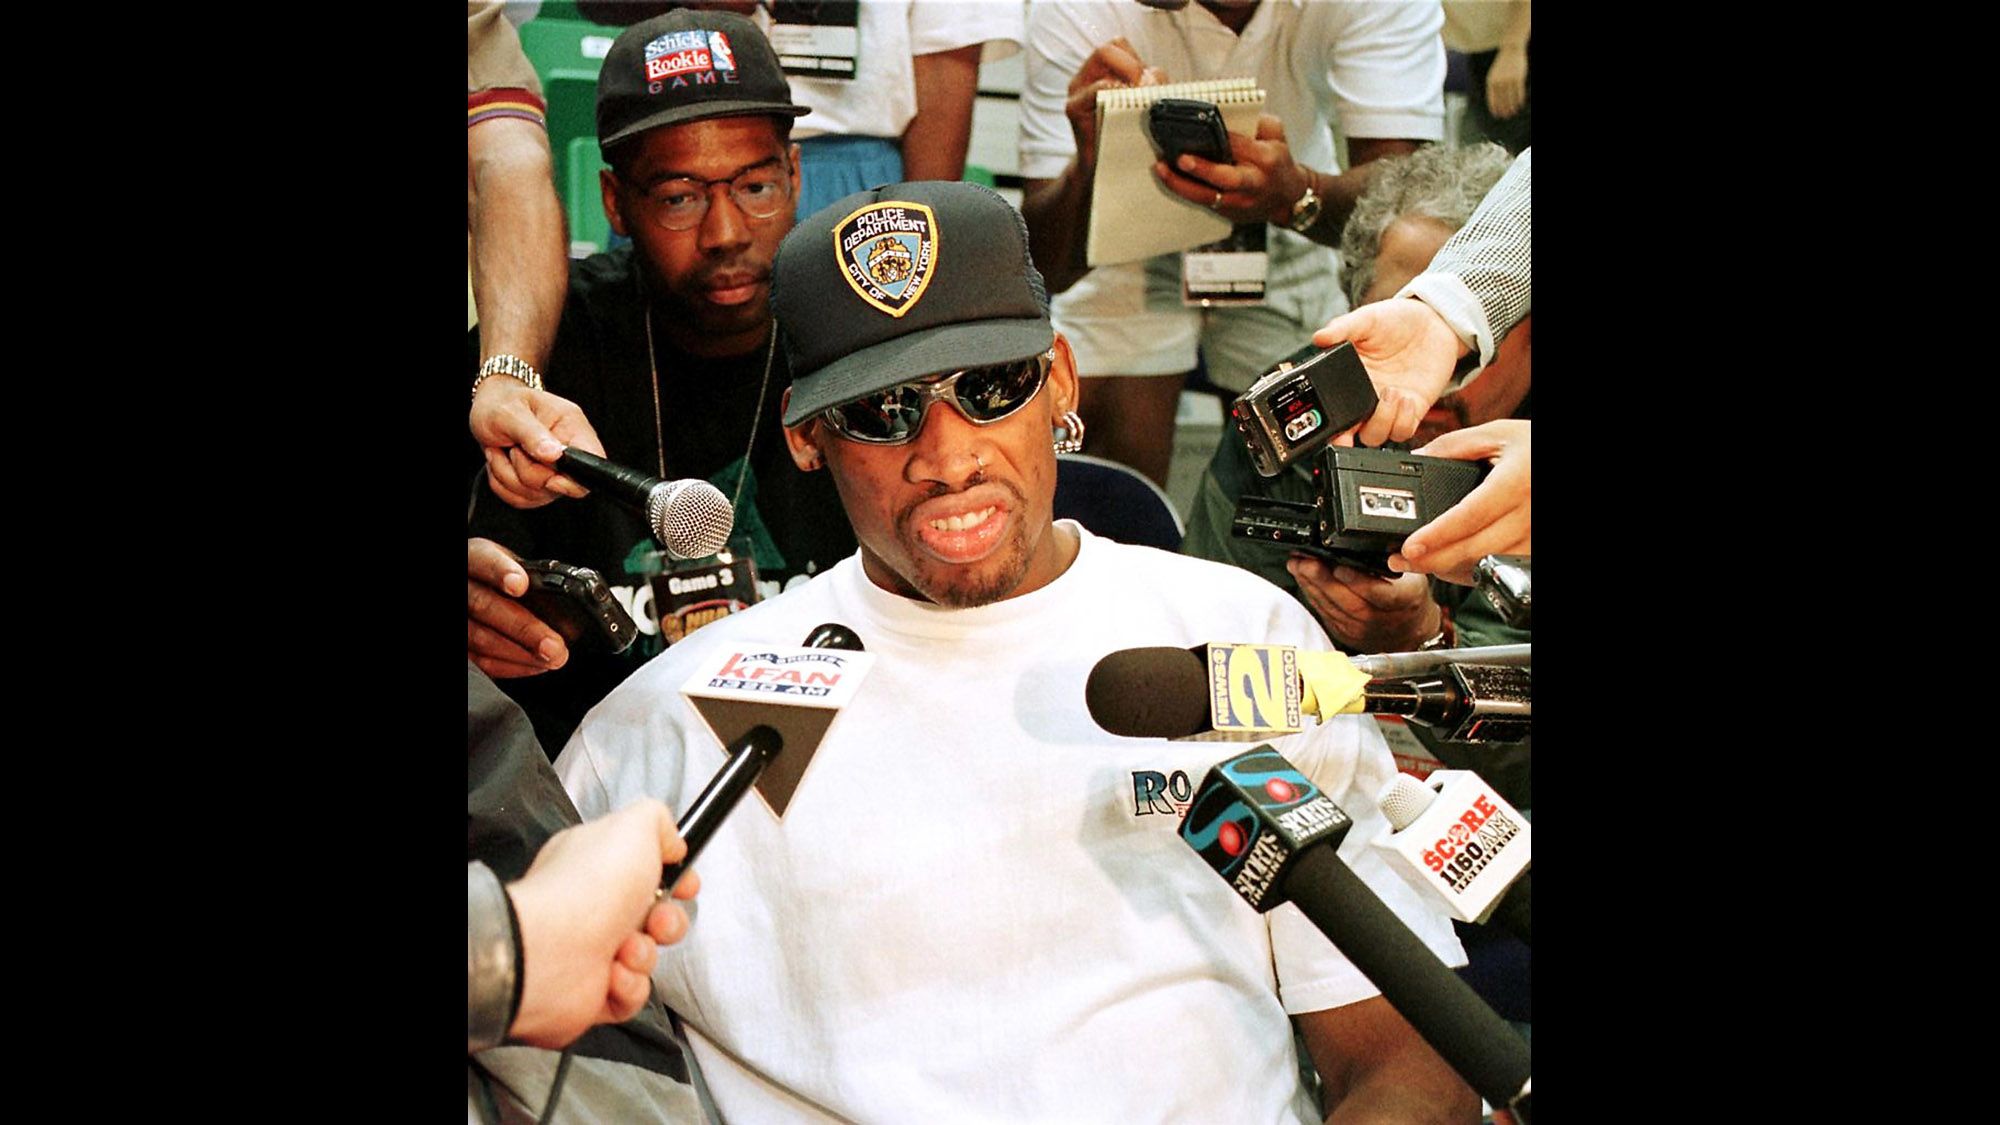 Dennis Rodman blasts Cleveland Cavaliers' owner for refusing to sign him